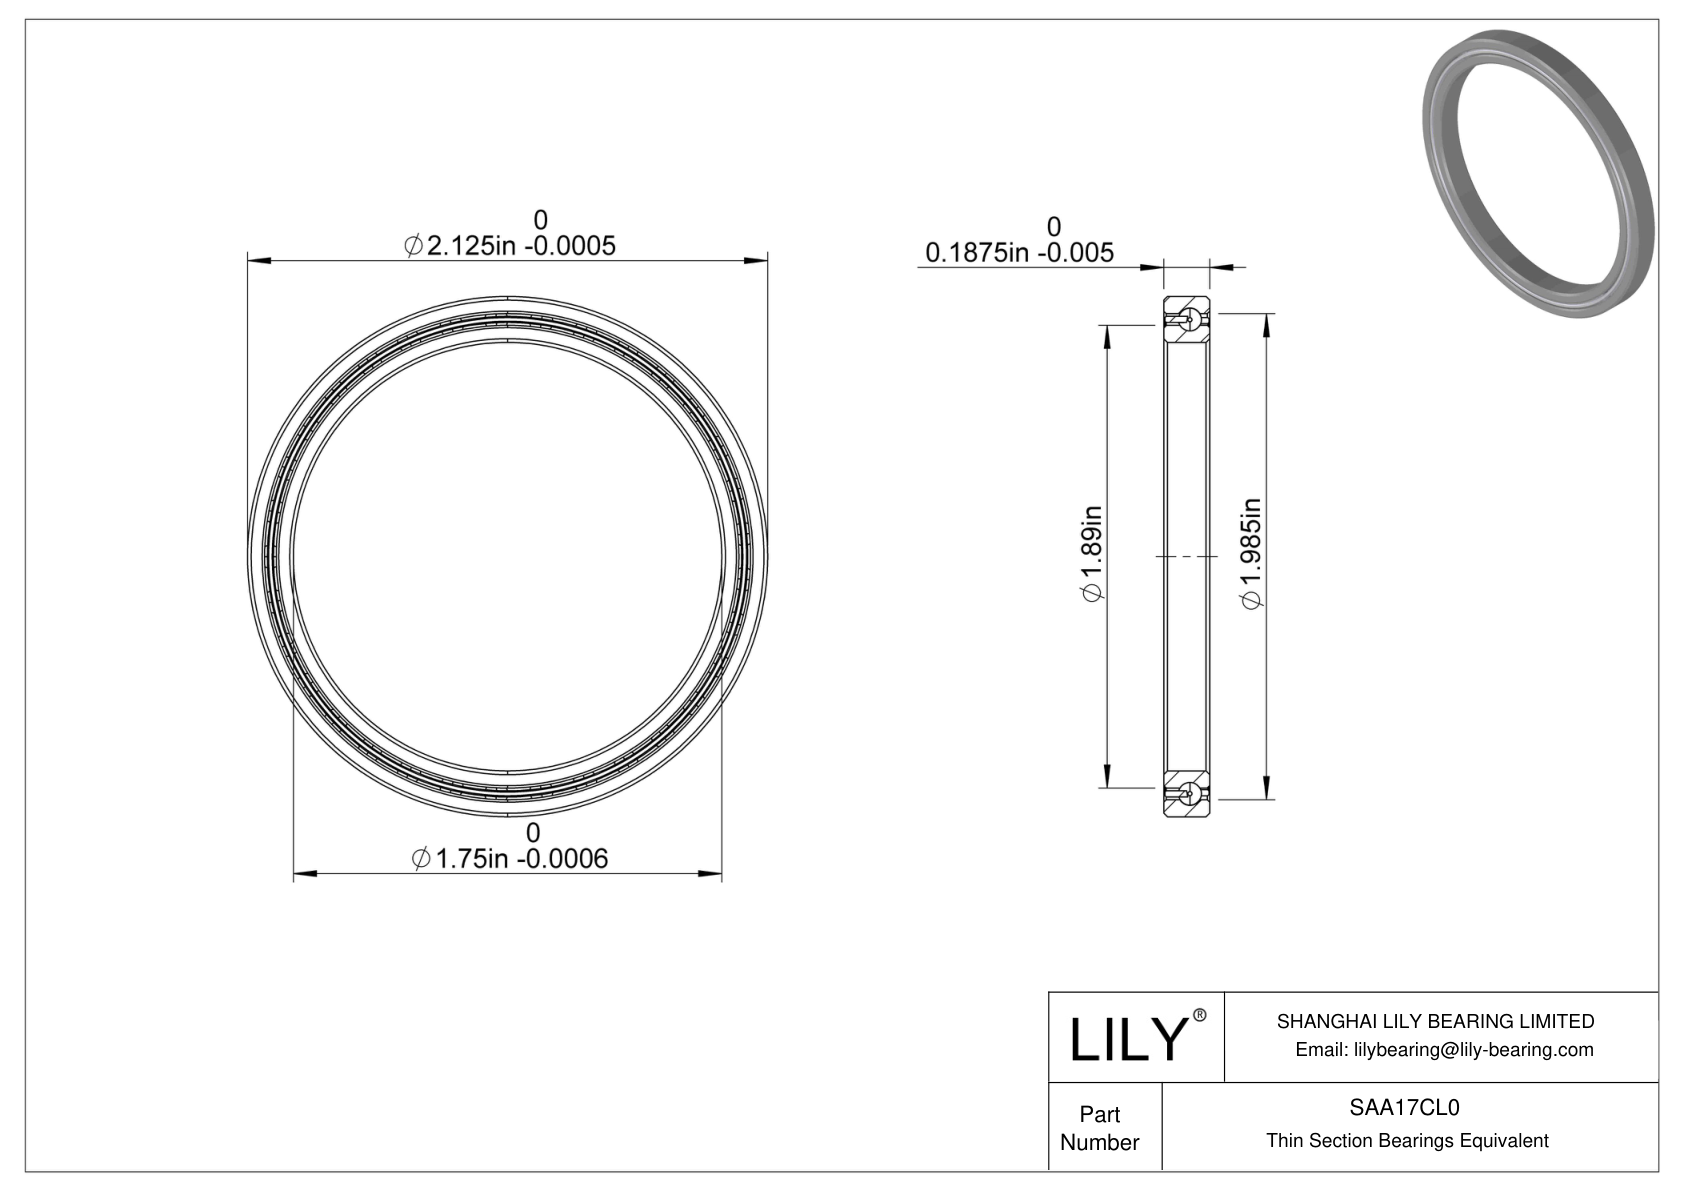 SAA17CL0 Constant Section (CS) Bearings CAD图形